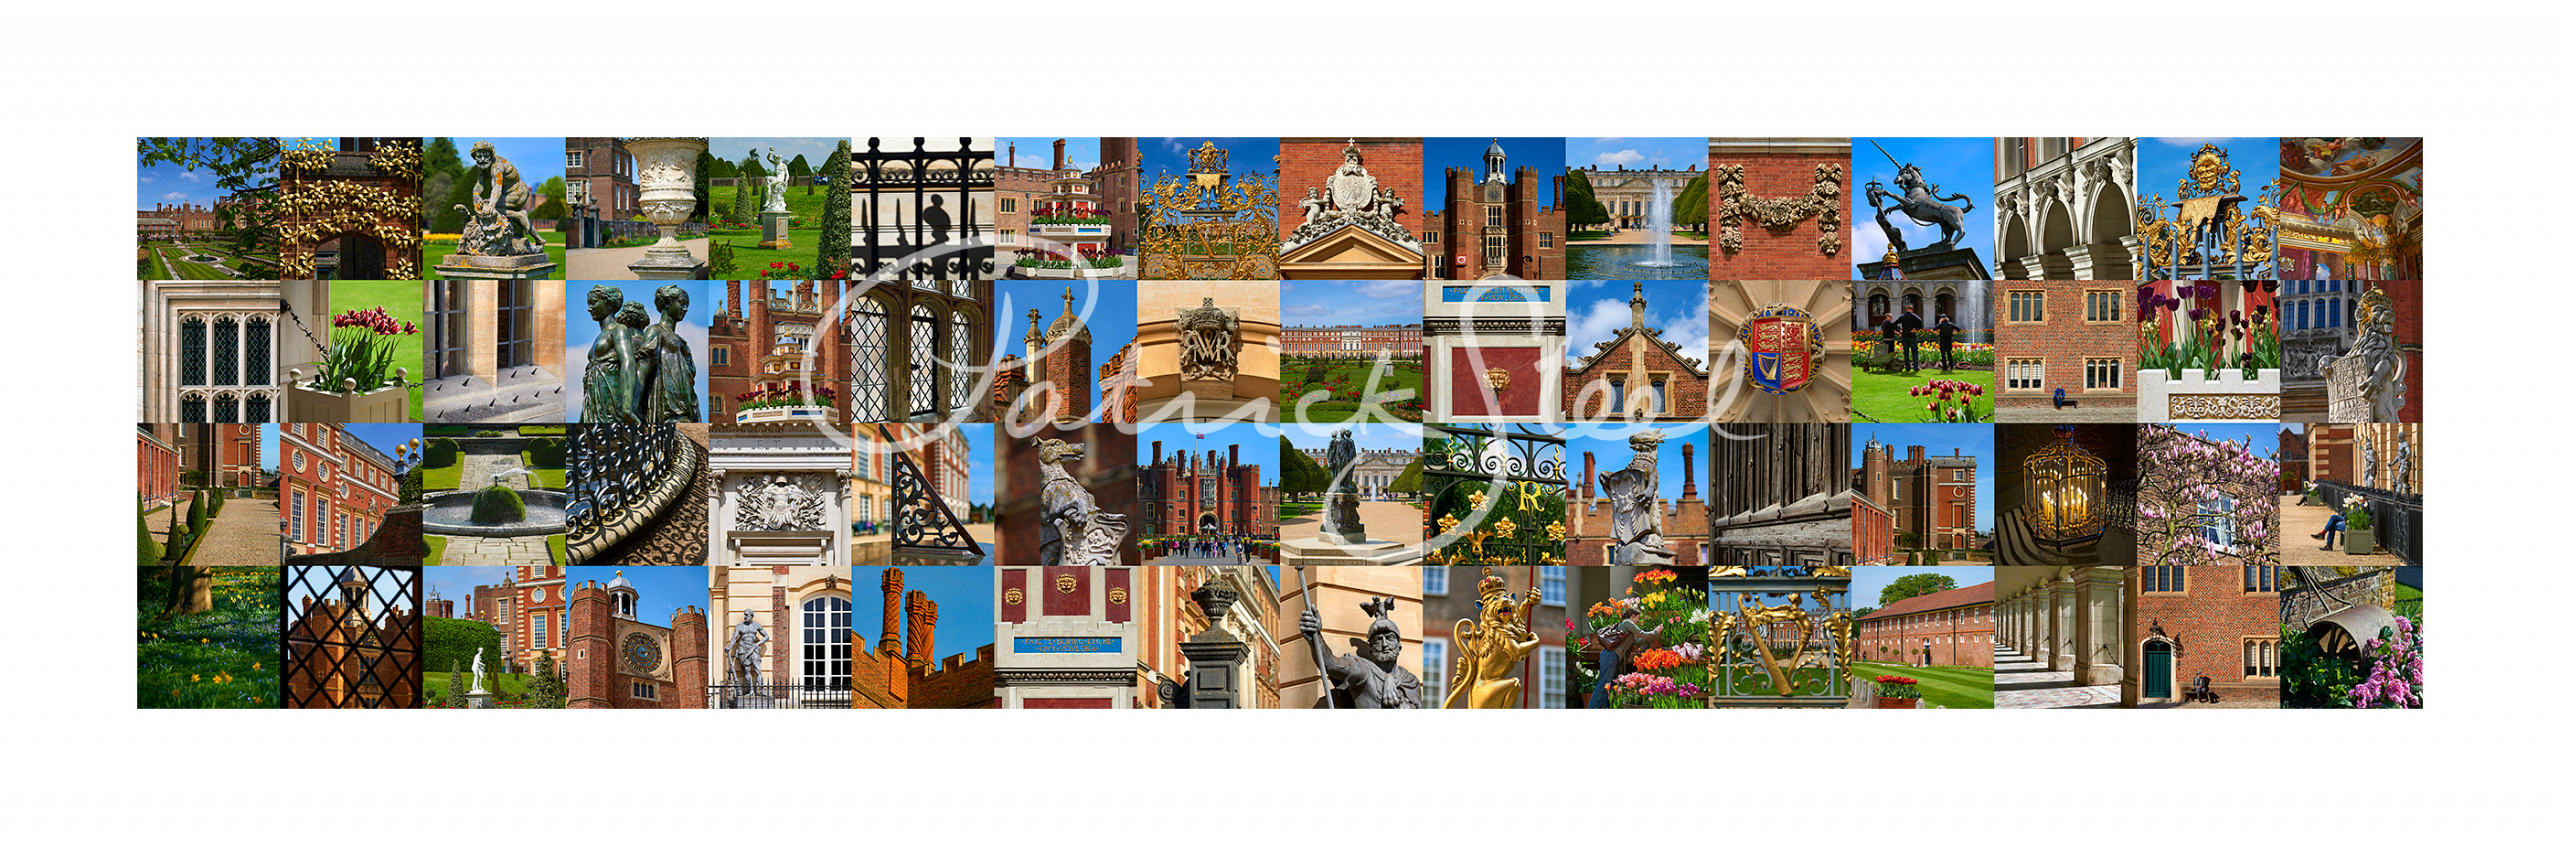 a landscape format photographic montage of hampton court palace by british photographer patrick steel